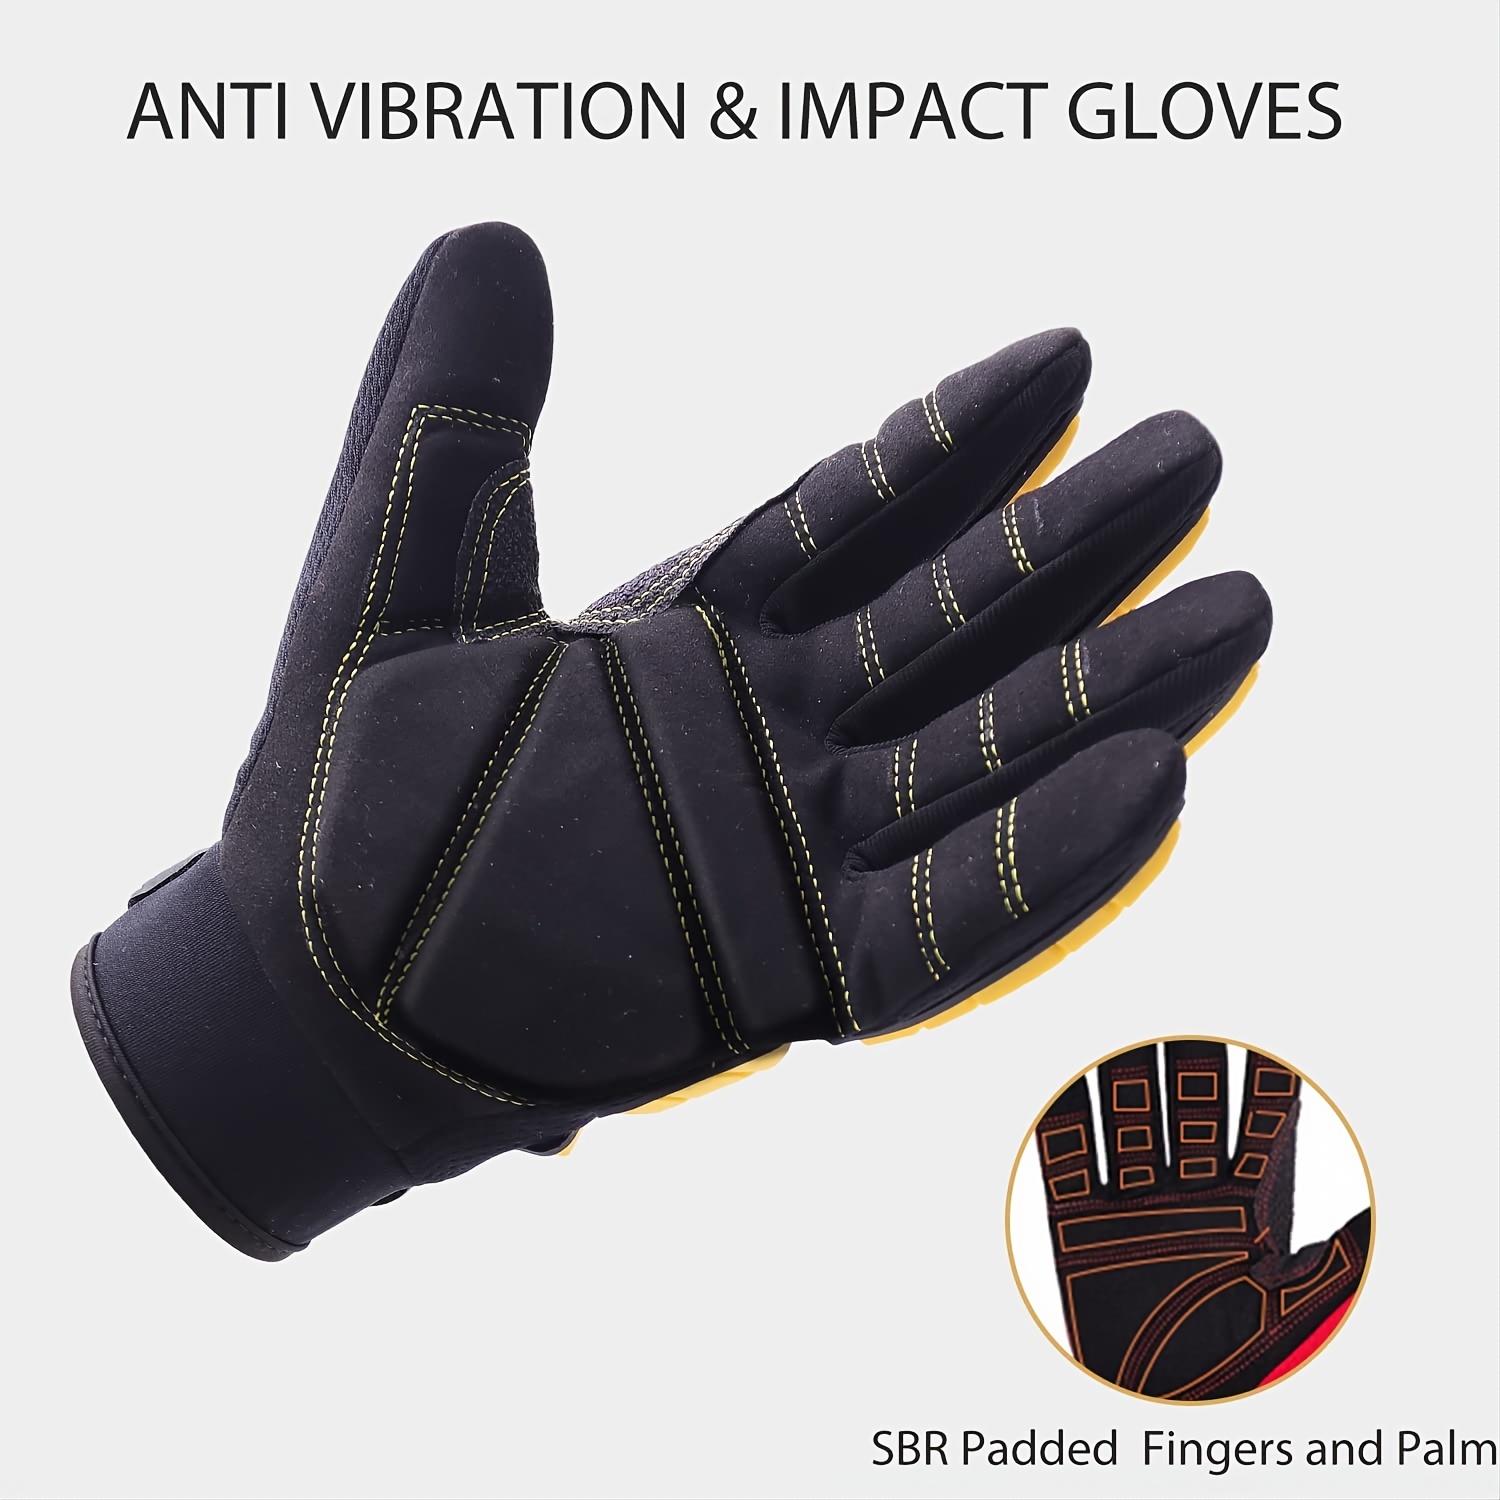 Generic Intra-FIT Anti Vibration Work Gloves, Shock Proof Impact